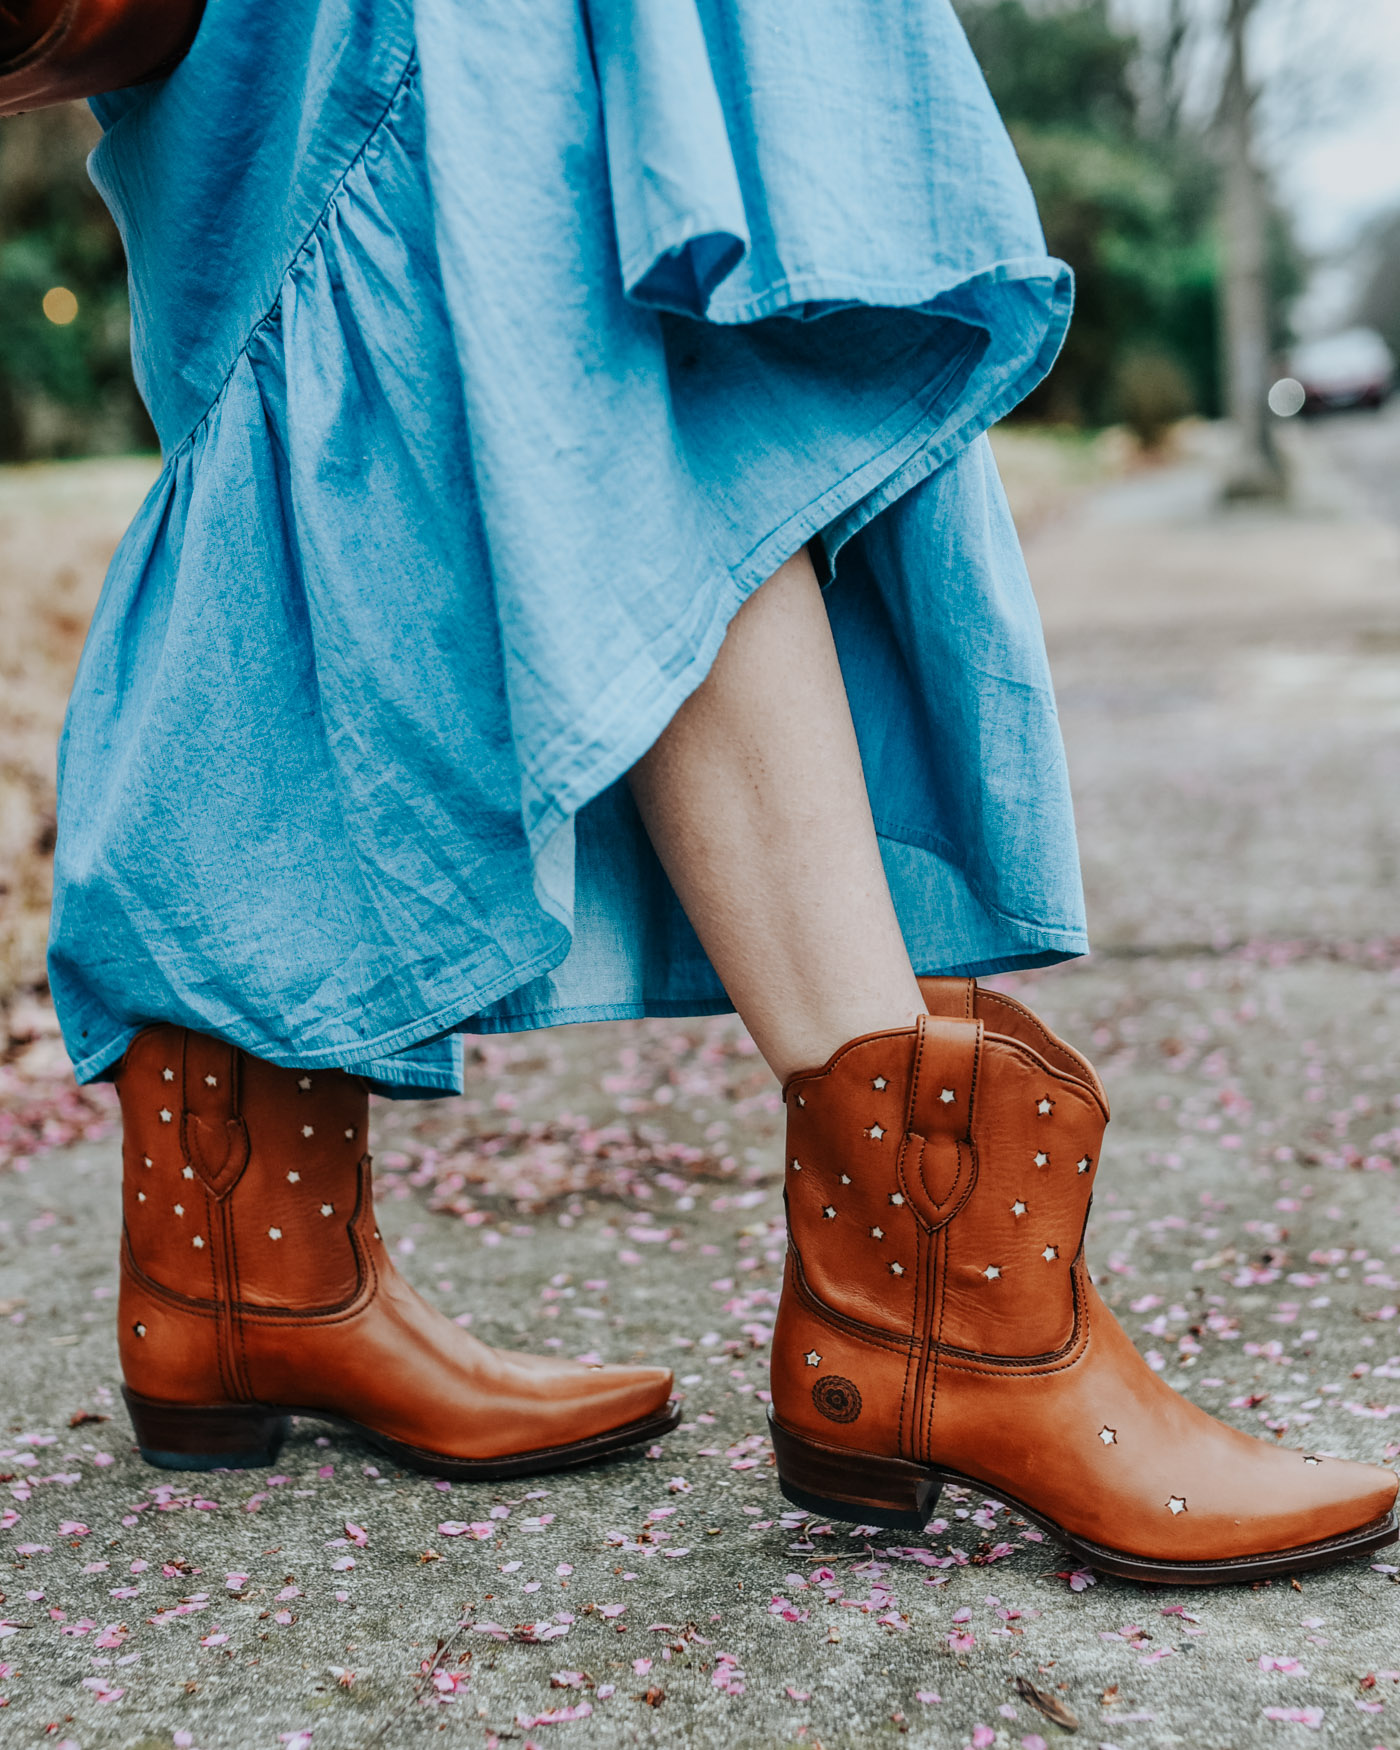 Maxi Dress and Cowboy Boots Look | Lone ...